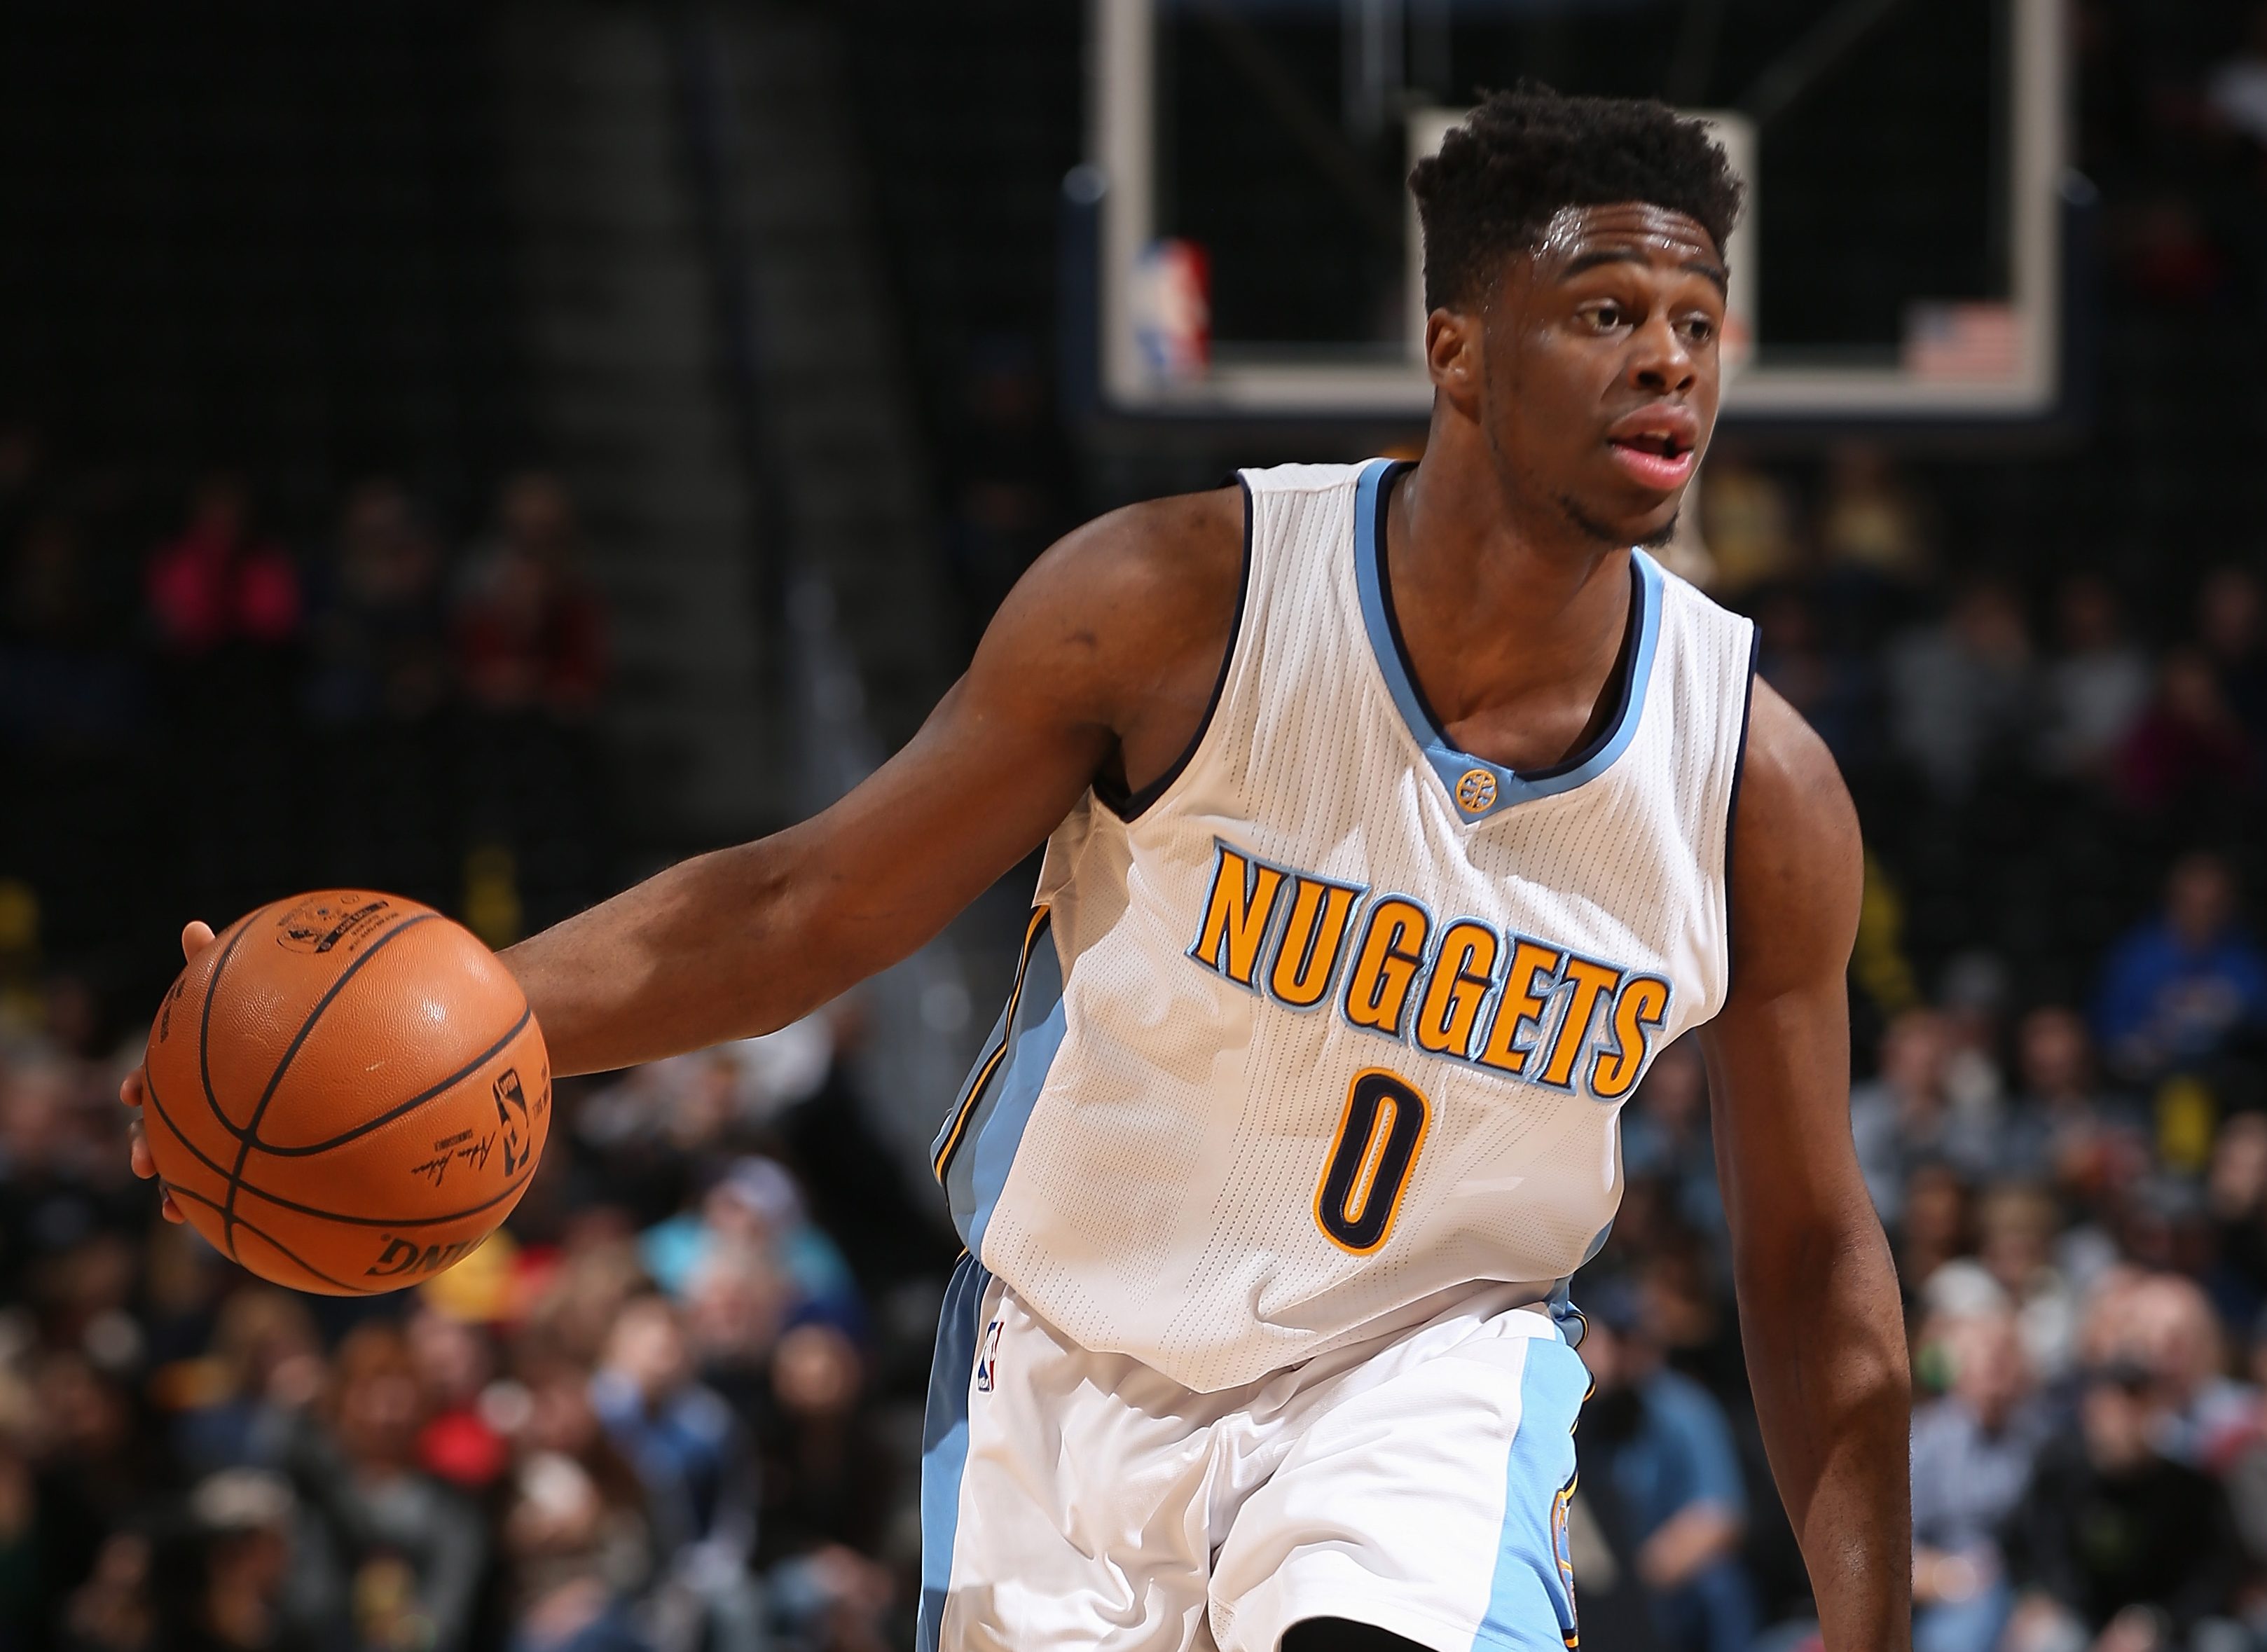 Suns vs. Nuggets Live Stream How to Watch Online